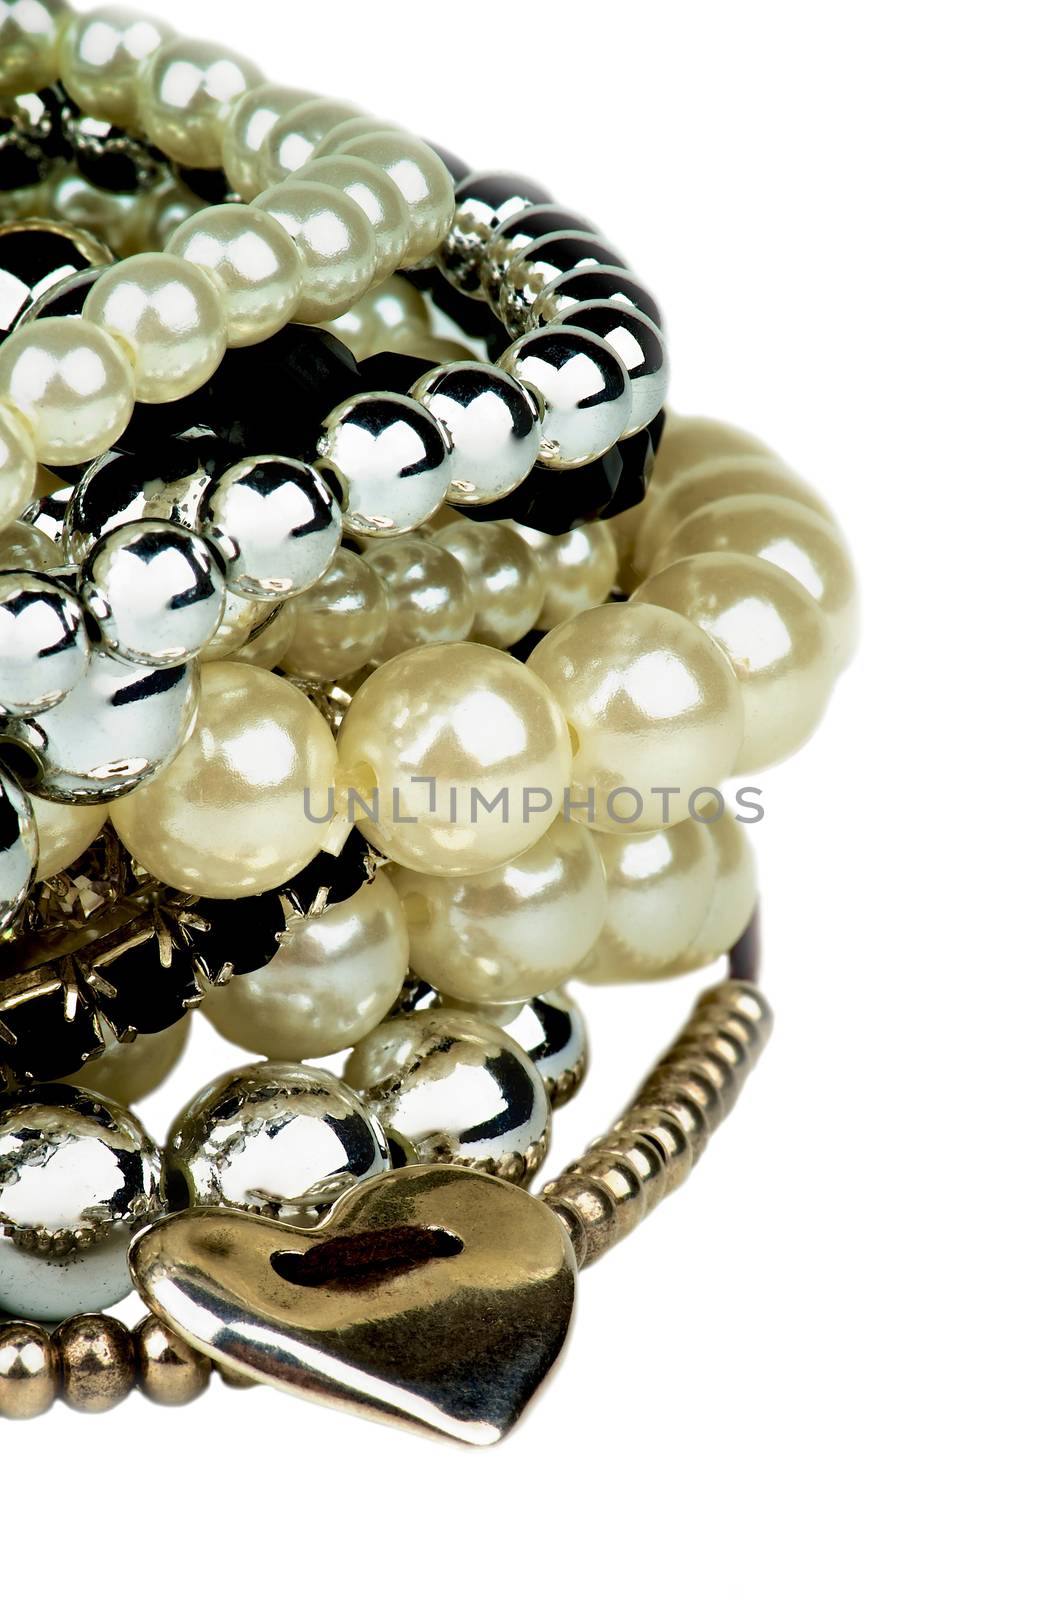 Stack of Various Pearl, Silver and Black Jewelry Gems Bracelets with Silver Heart Shape closeup